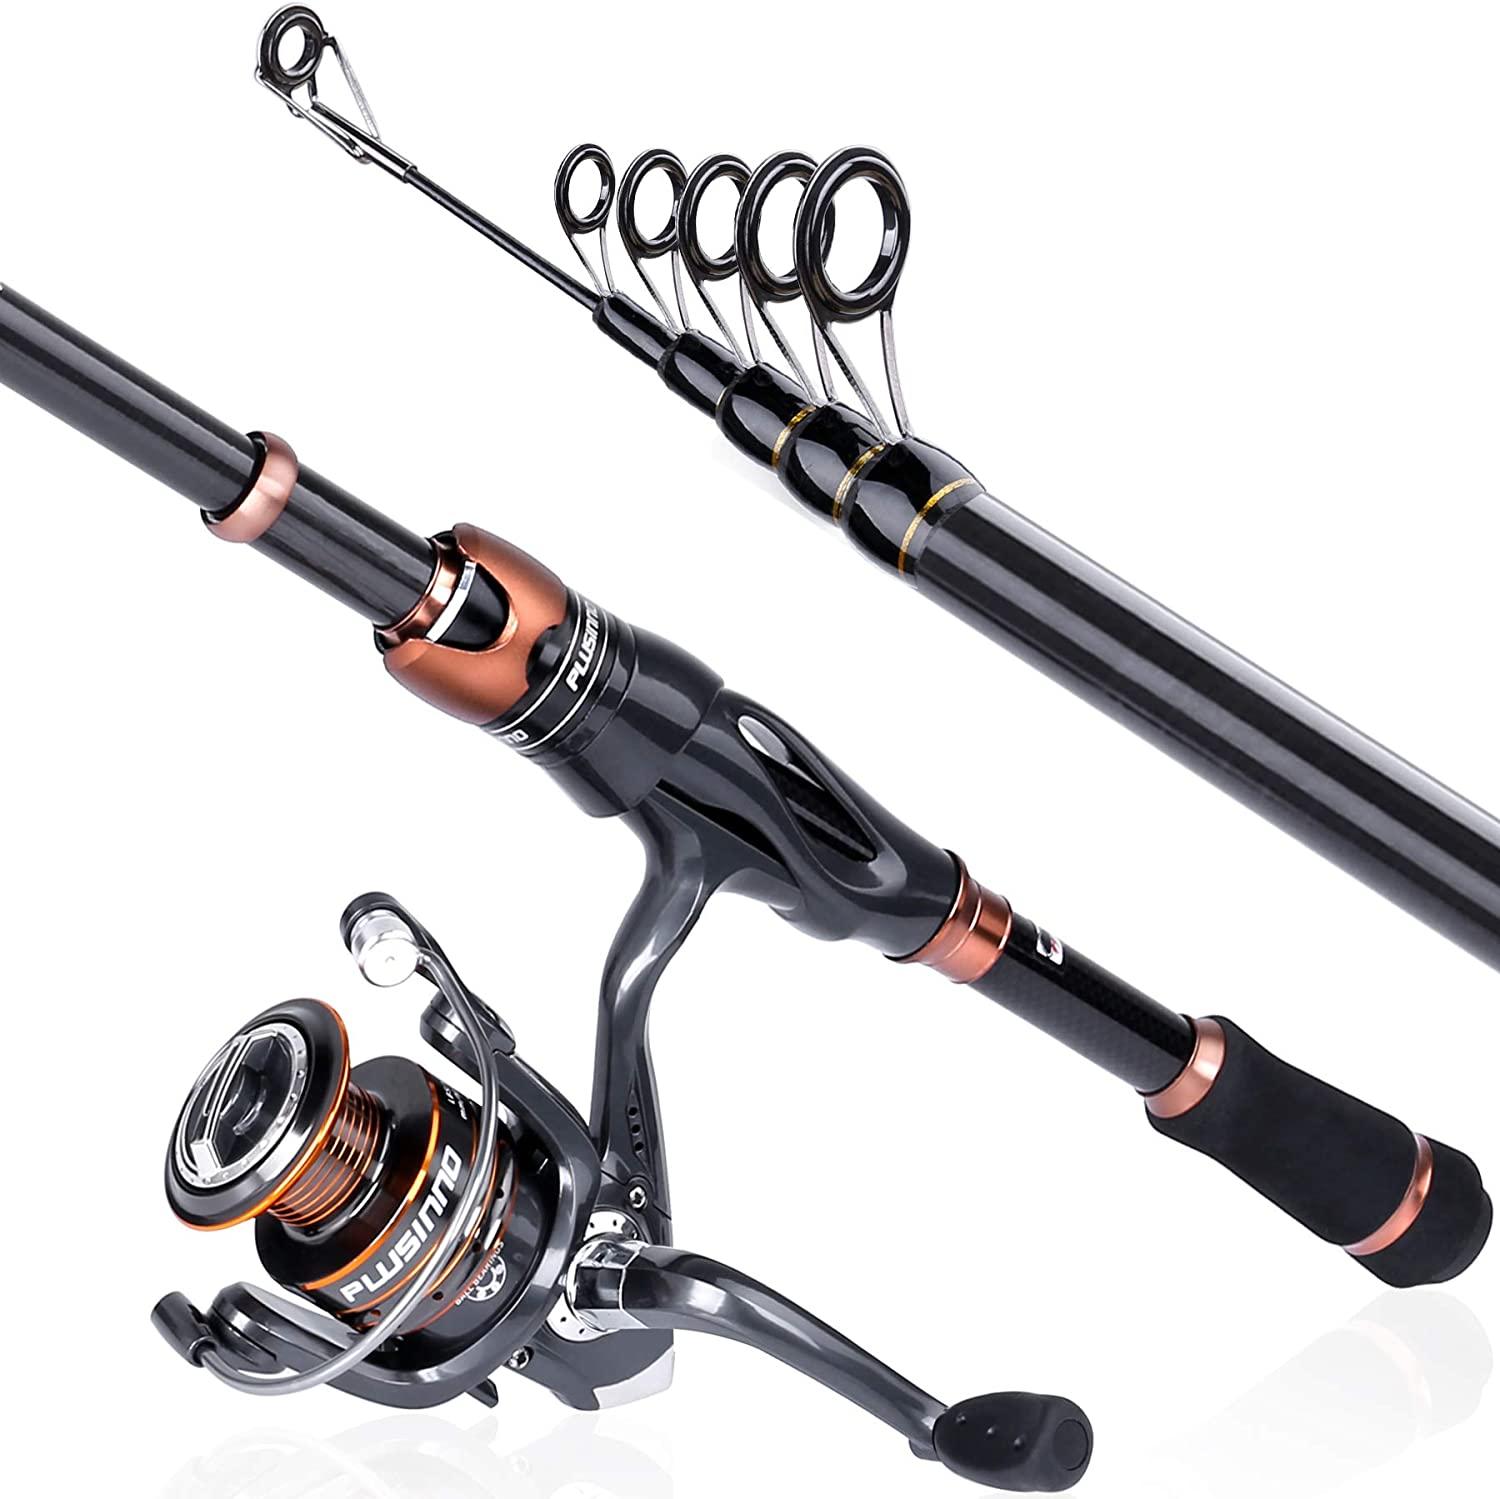 PLUSINNO Fly Fishing Rod and Reel Combo, 4 Piece India